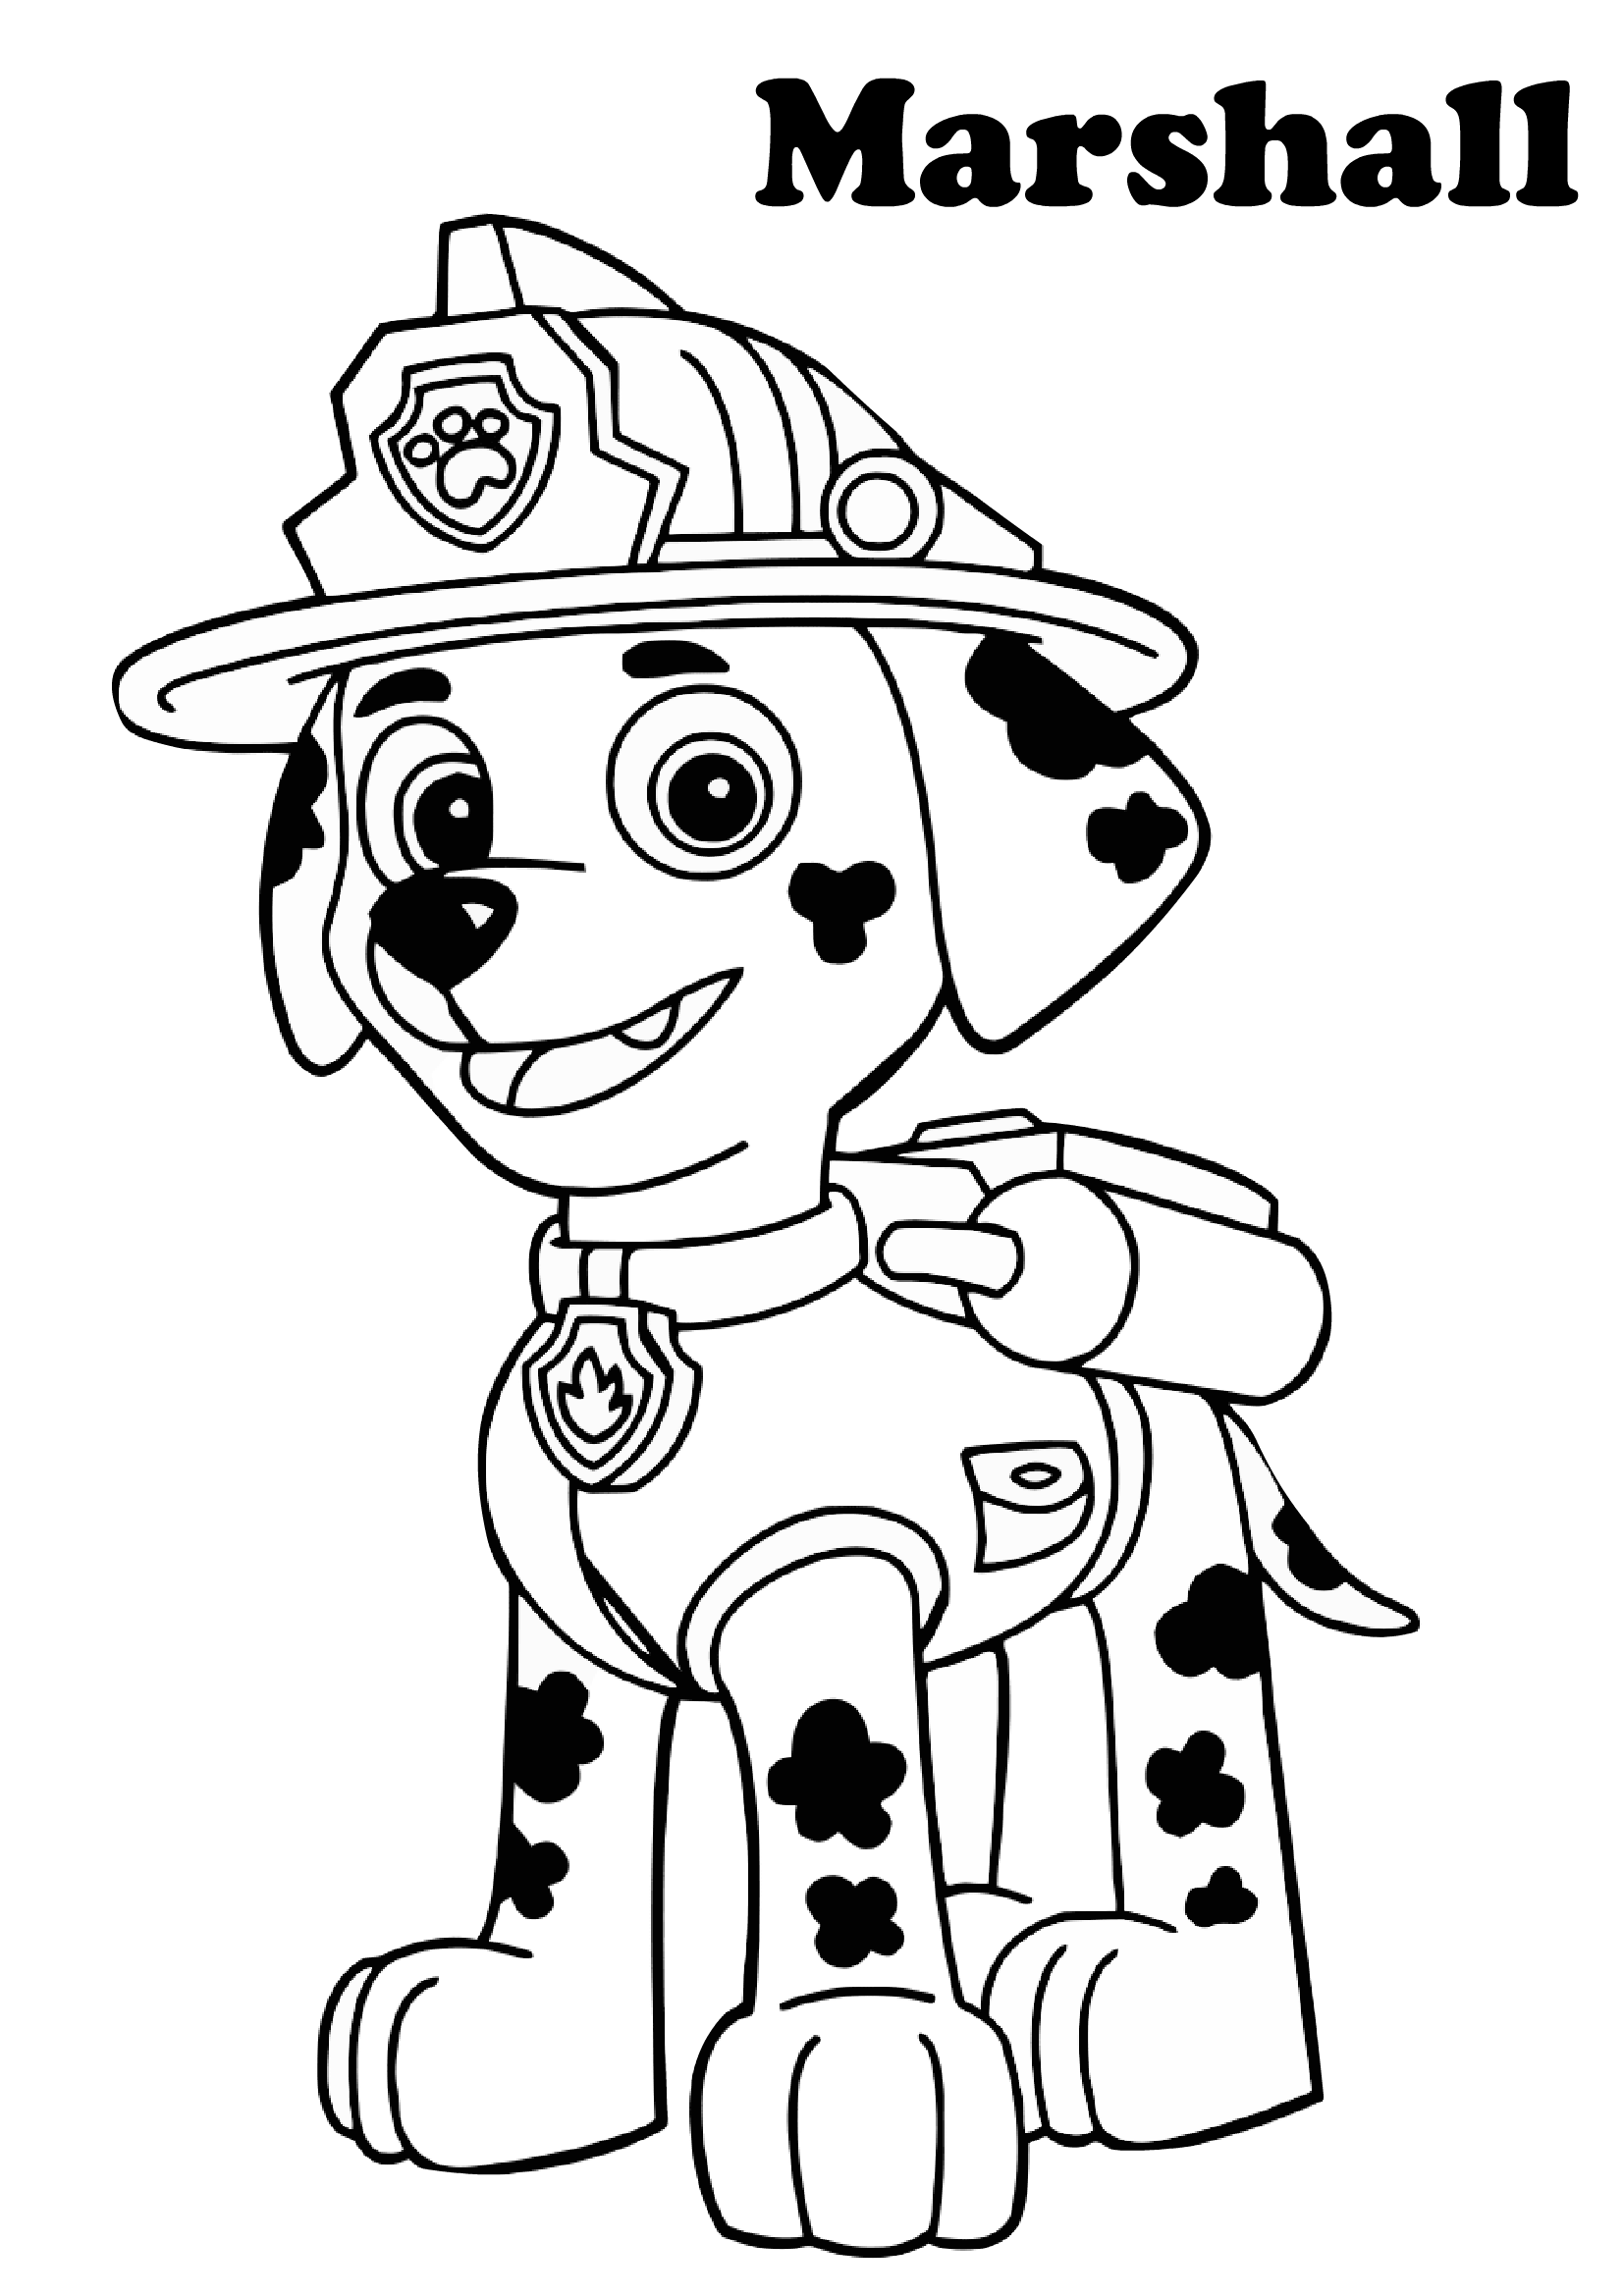 Paw Patrol Coloring Pages FREE Printable 39